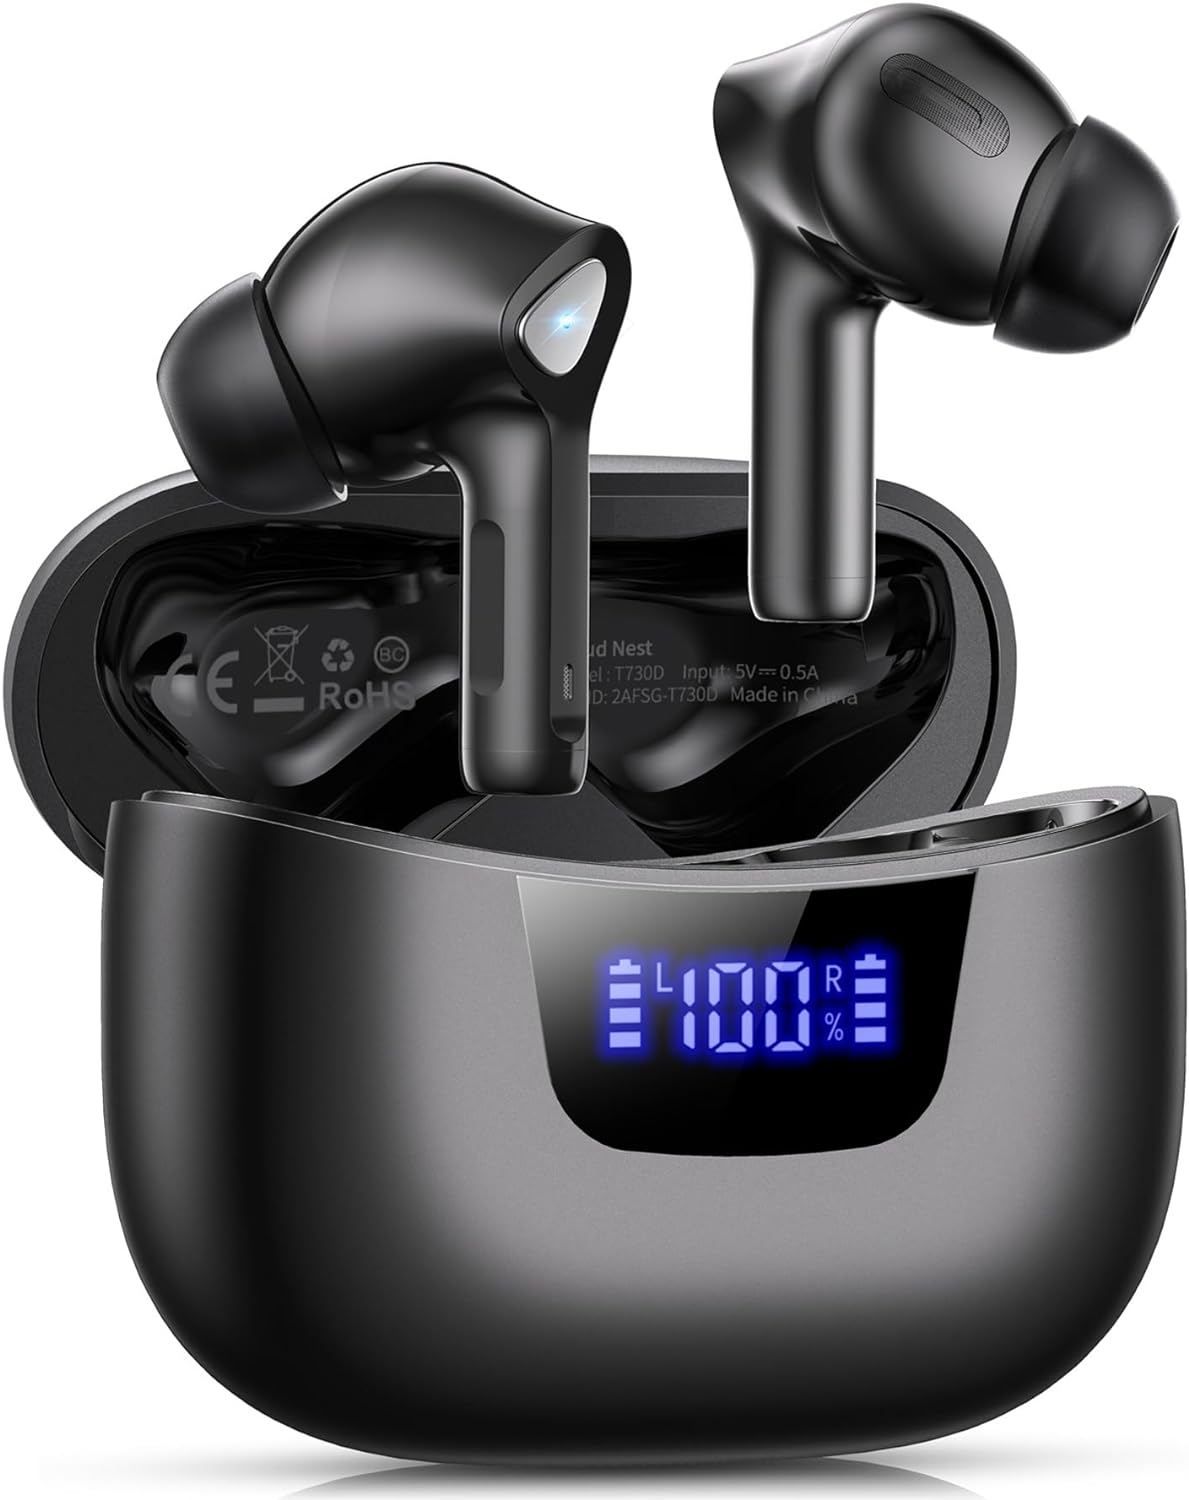 Wireless Earbuds Bluetooth V5.3 Headphones 50H Playback Deep Bass Stereo Ear Buds with LED Power Display Charging Case IPX7 Waterproof Earphones with Mic Headset for Laptop Pad Android/iOS Phones